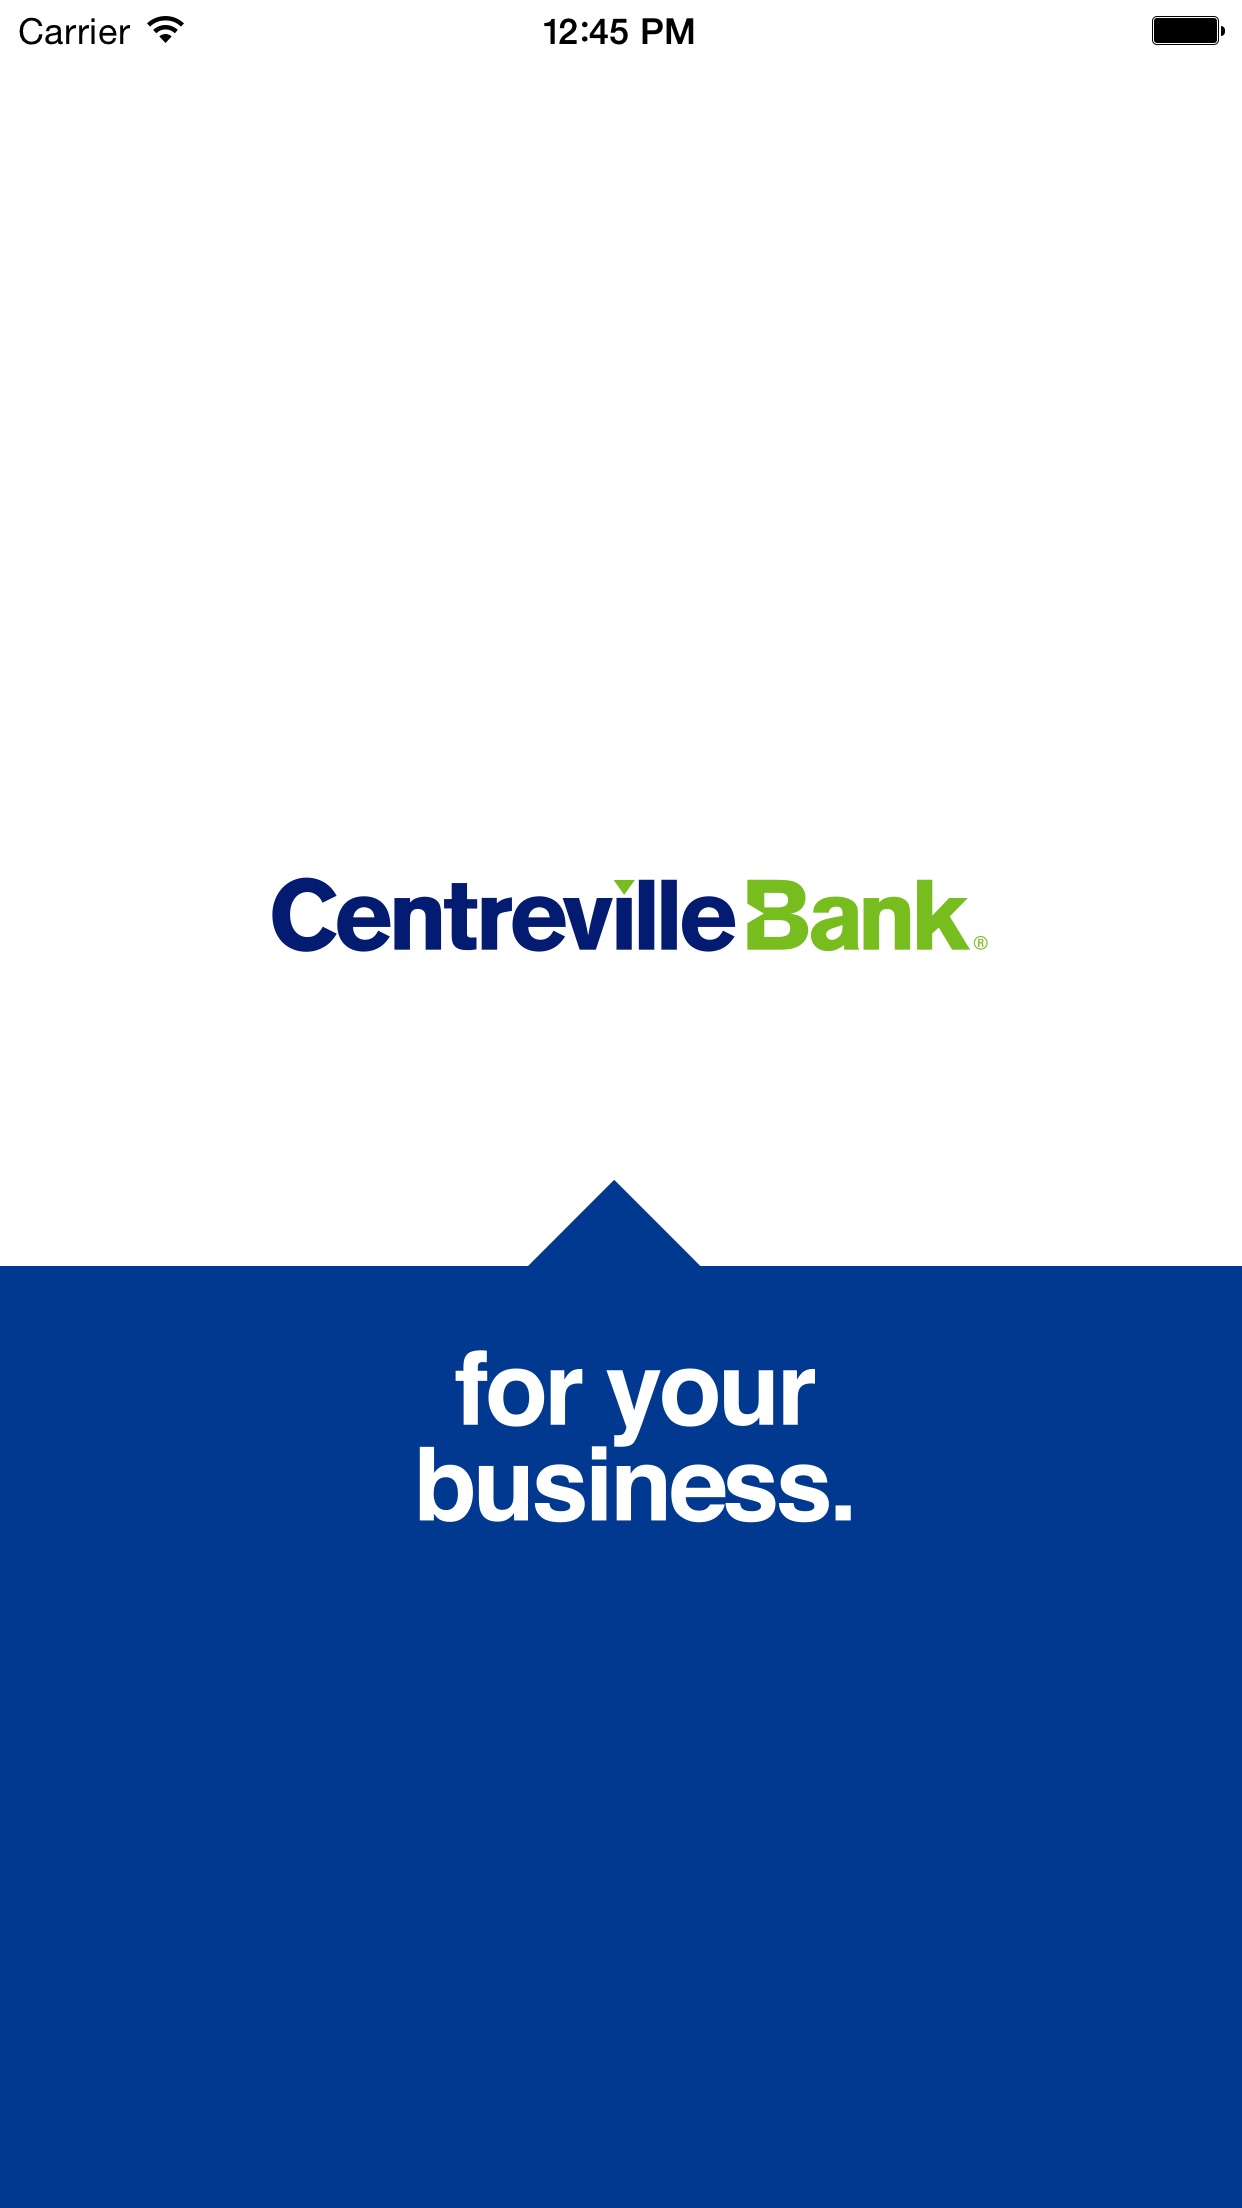 What services does Centreville Bank offer?